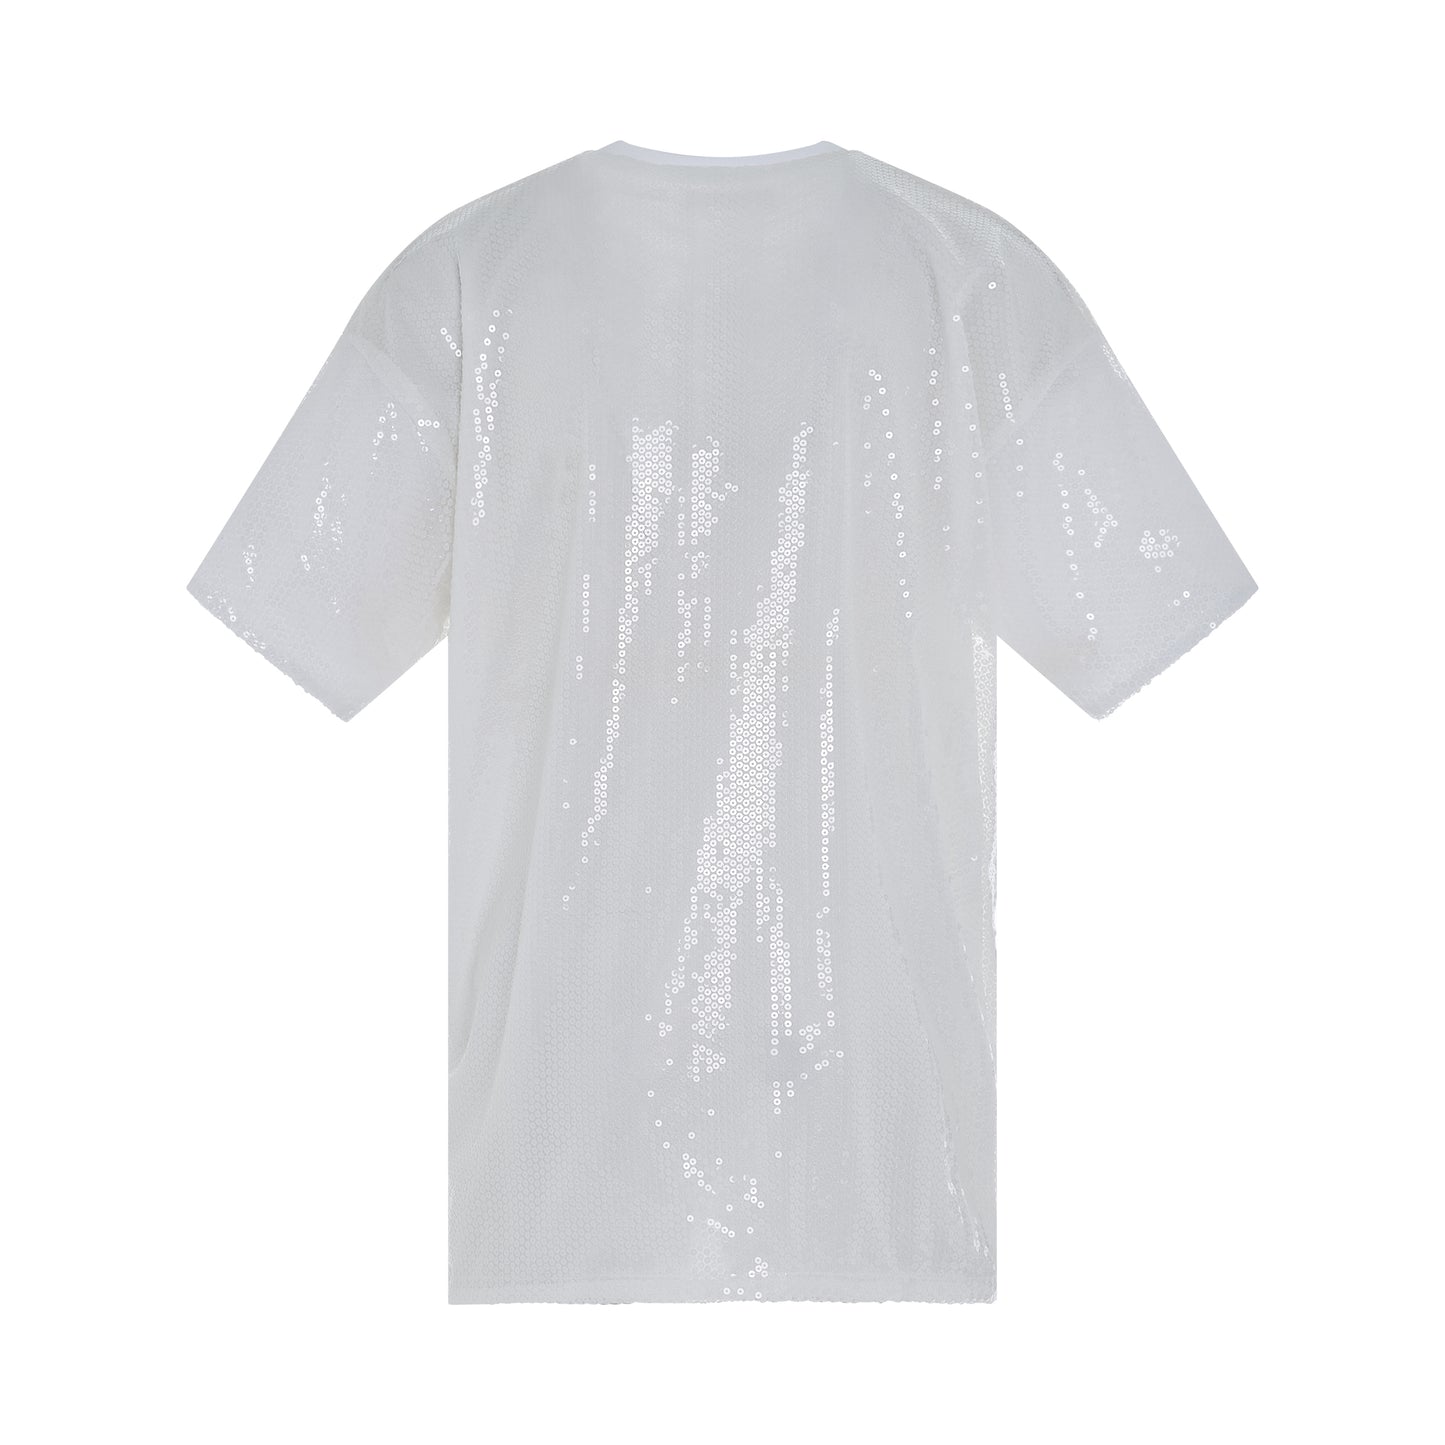 Vegetable Printed Spangle T-Shirt in White